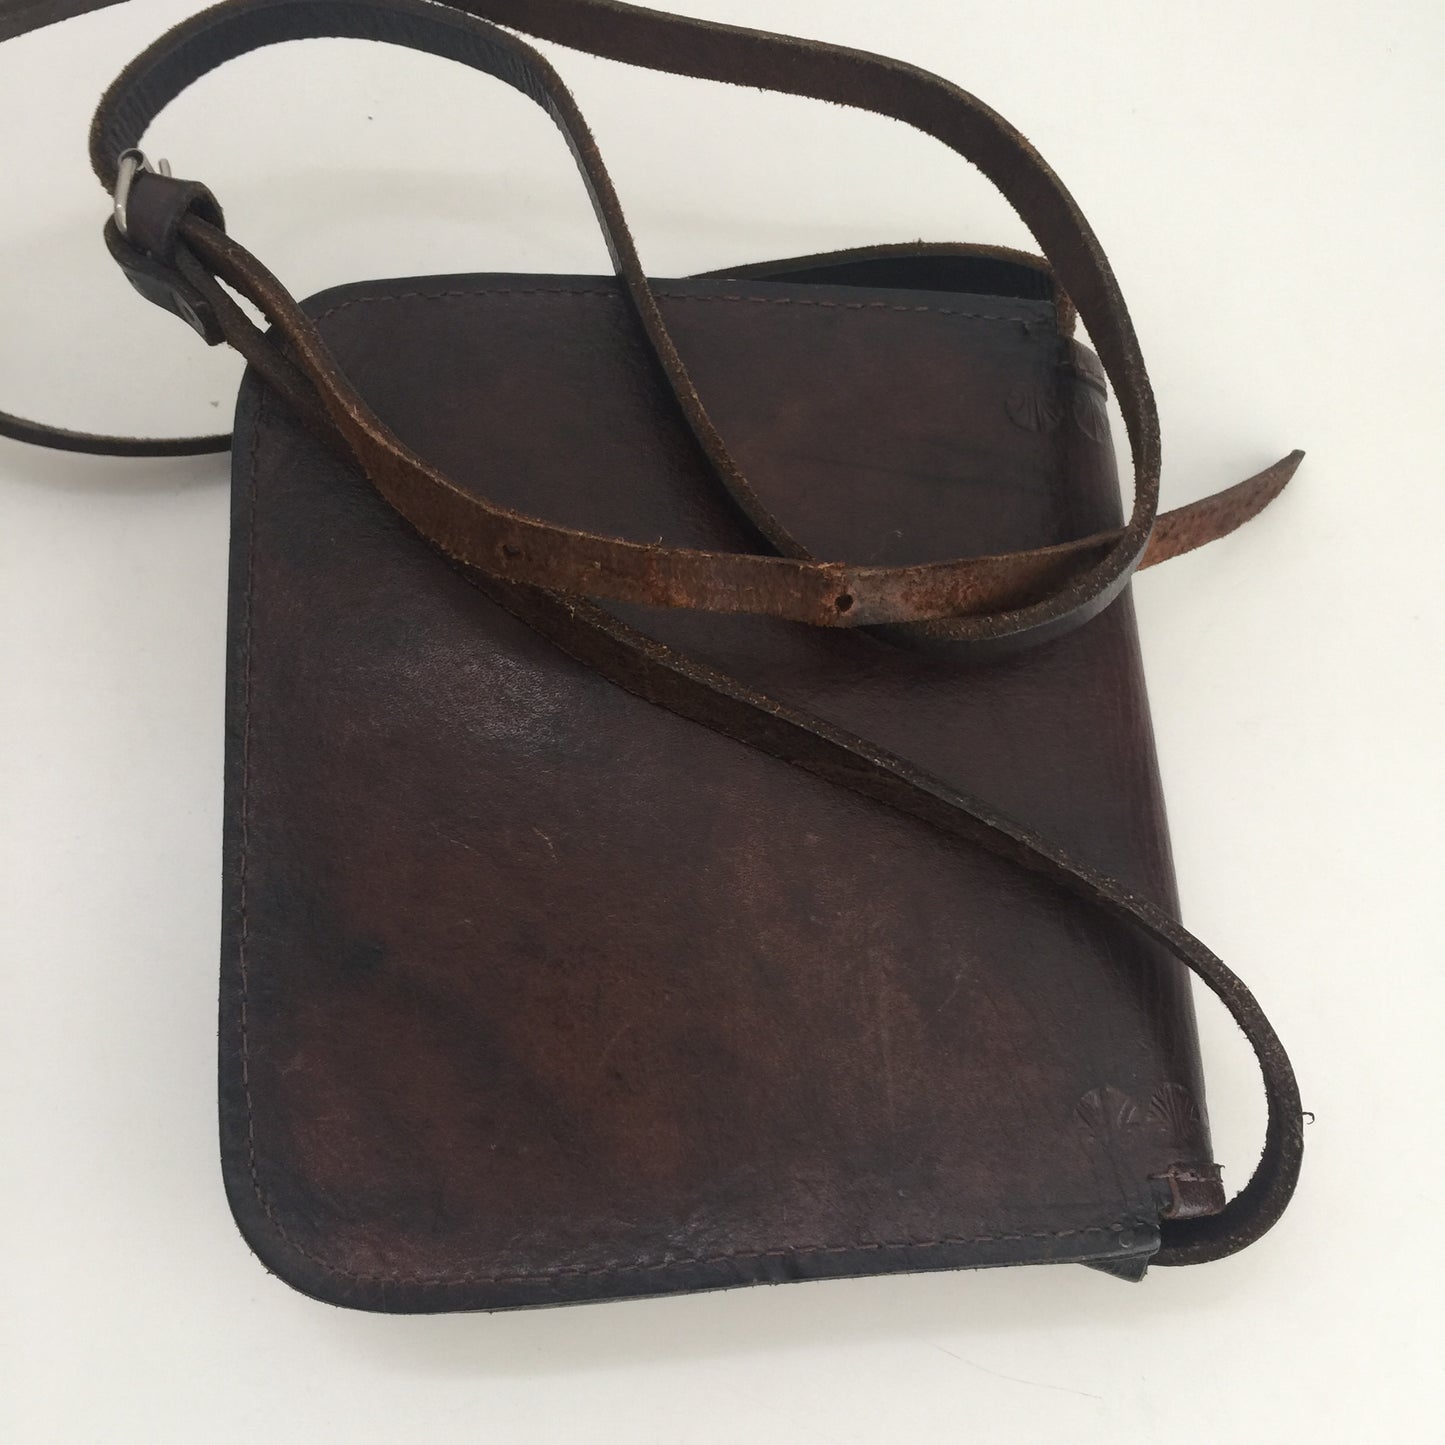 Adorable Little Bag Cute Frontage Genuine LEATHER Purse